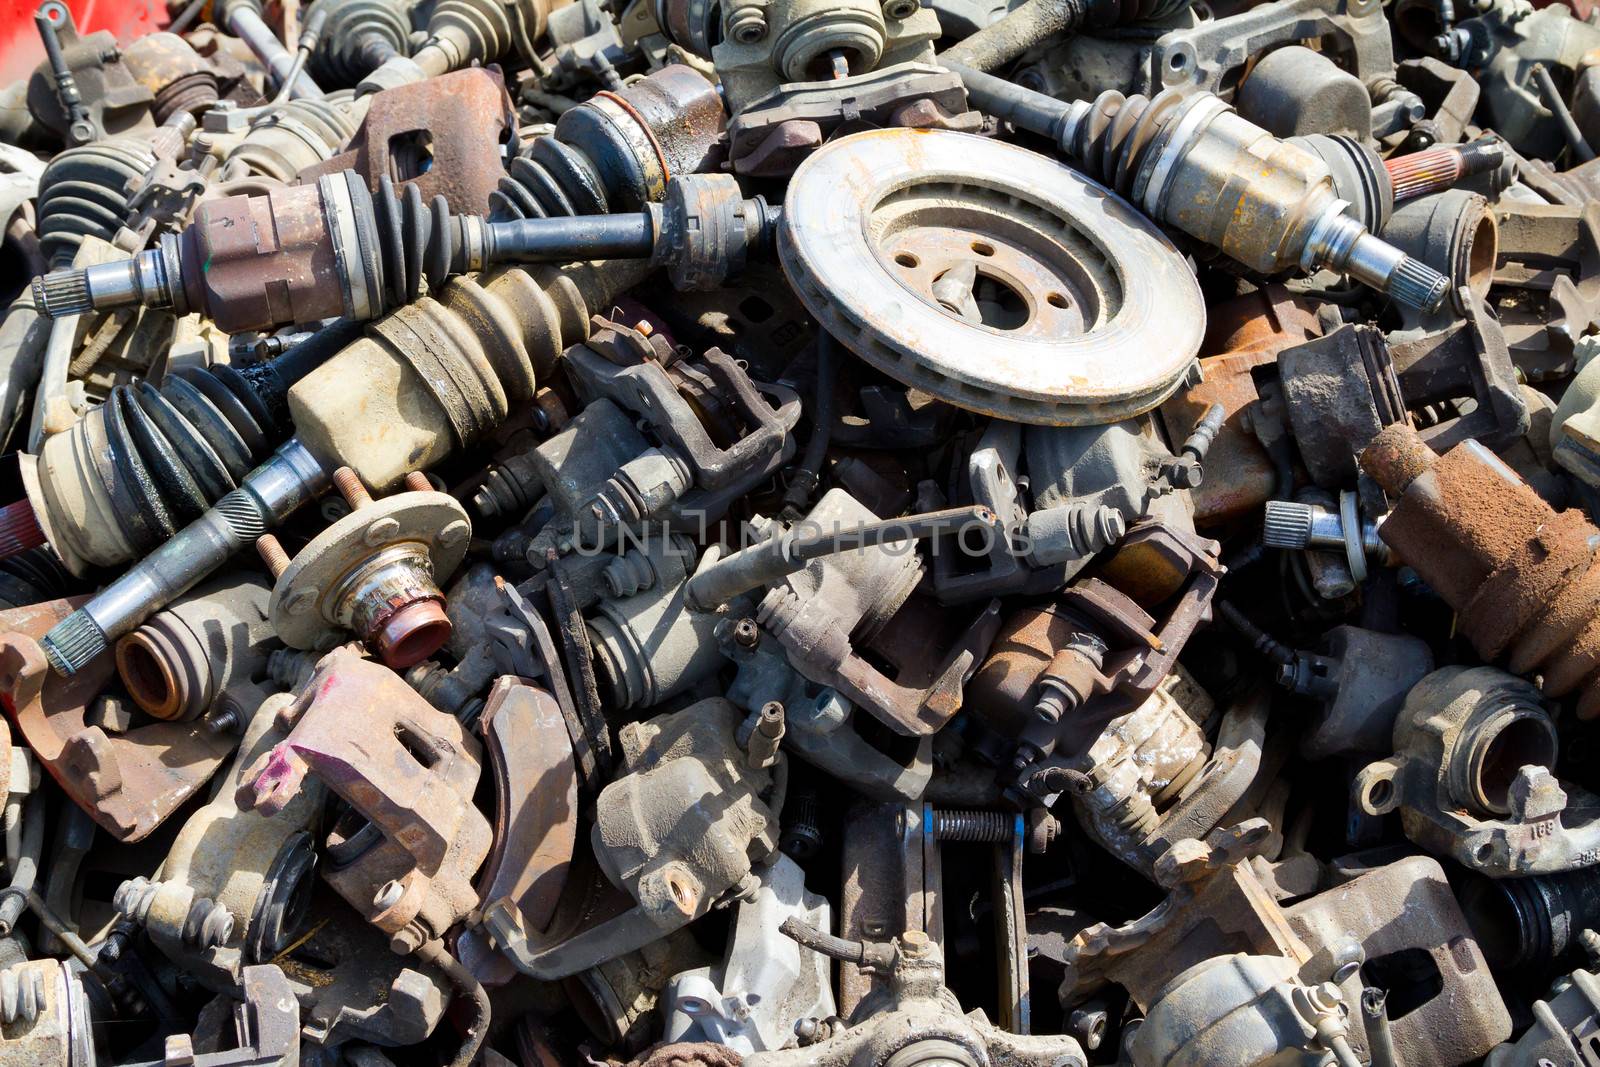 Junkyard Detail Abstract by joshuaraineyphotography